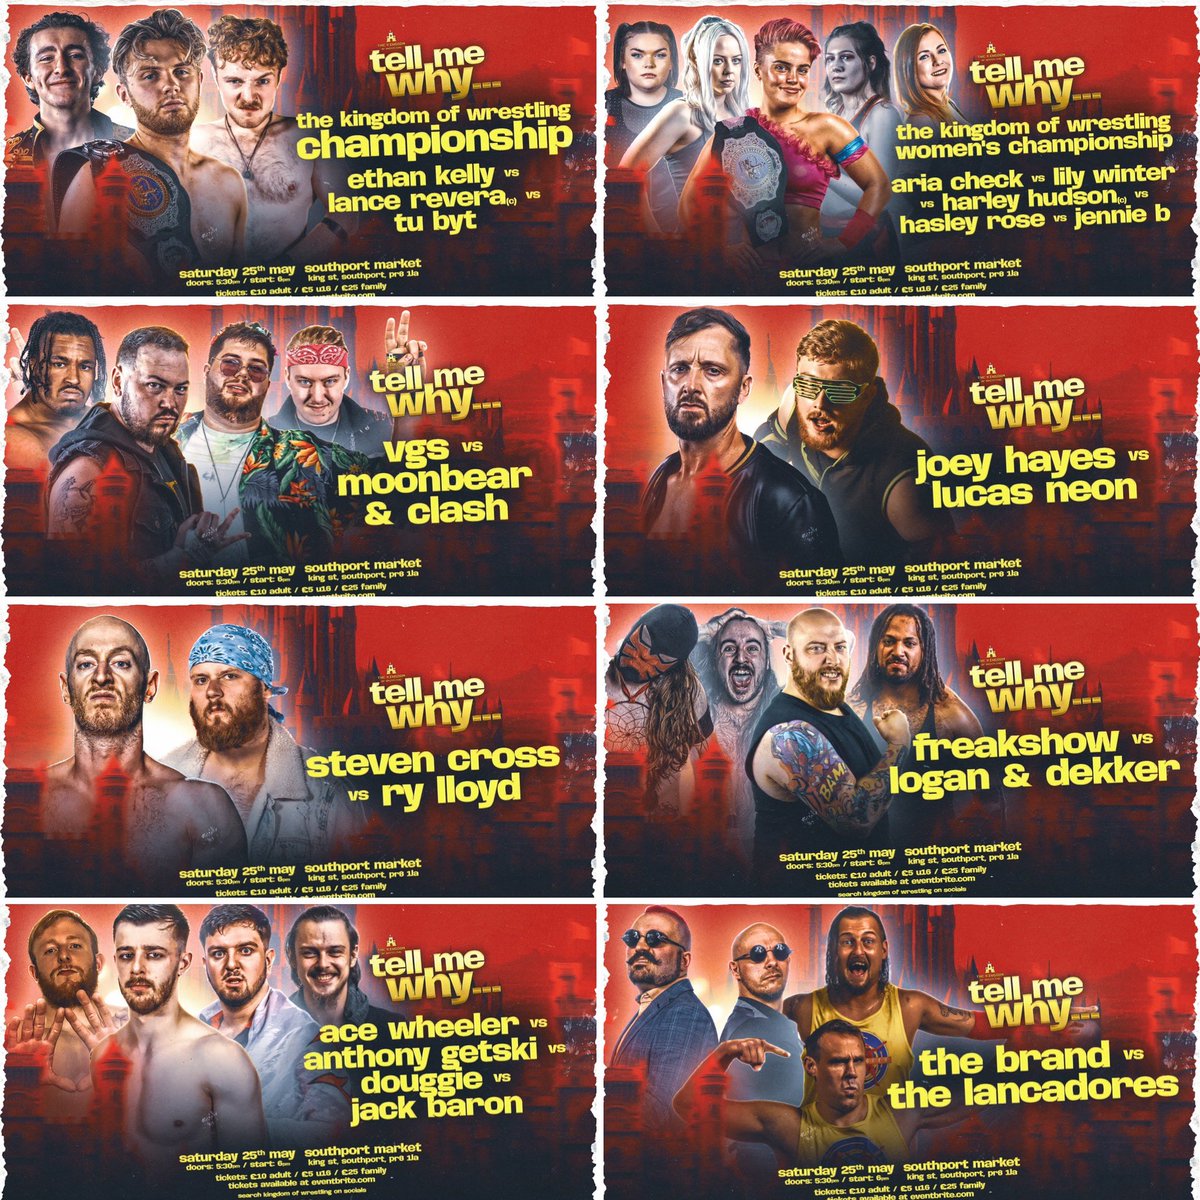 So there it is: the full card for Tell me Why…on May 25th at @spt_mkt It’s a packed show with lots going on. Will we have new Royals come the end? Grab your tickets to find out: 🎟️ eventbrite.co.uk/e/tell-me-why-…